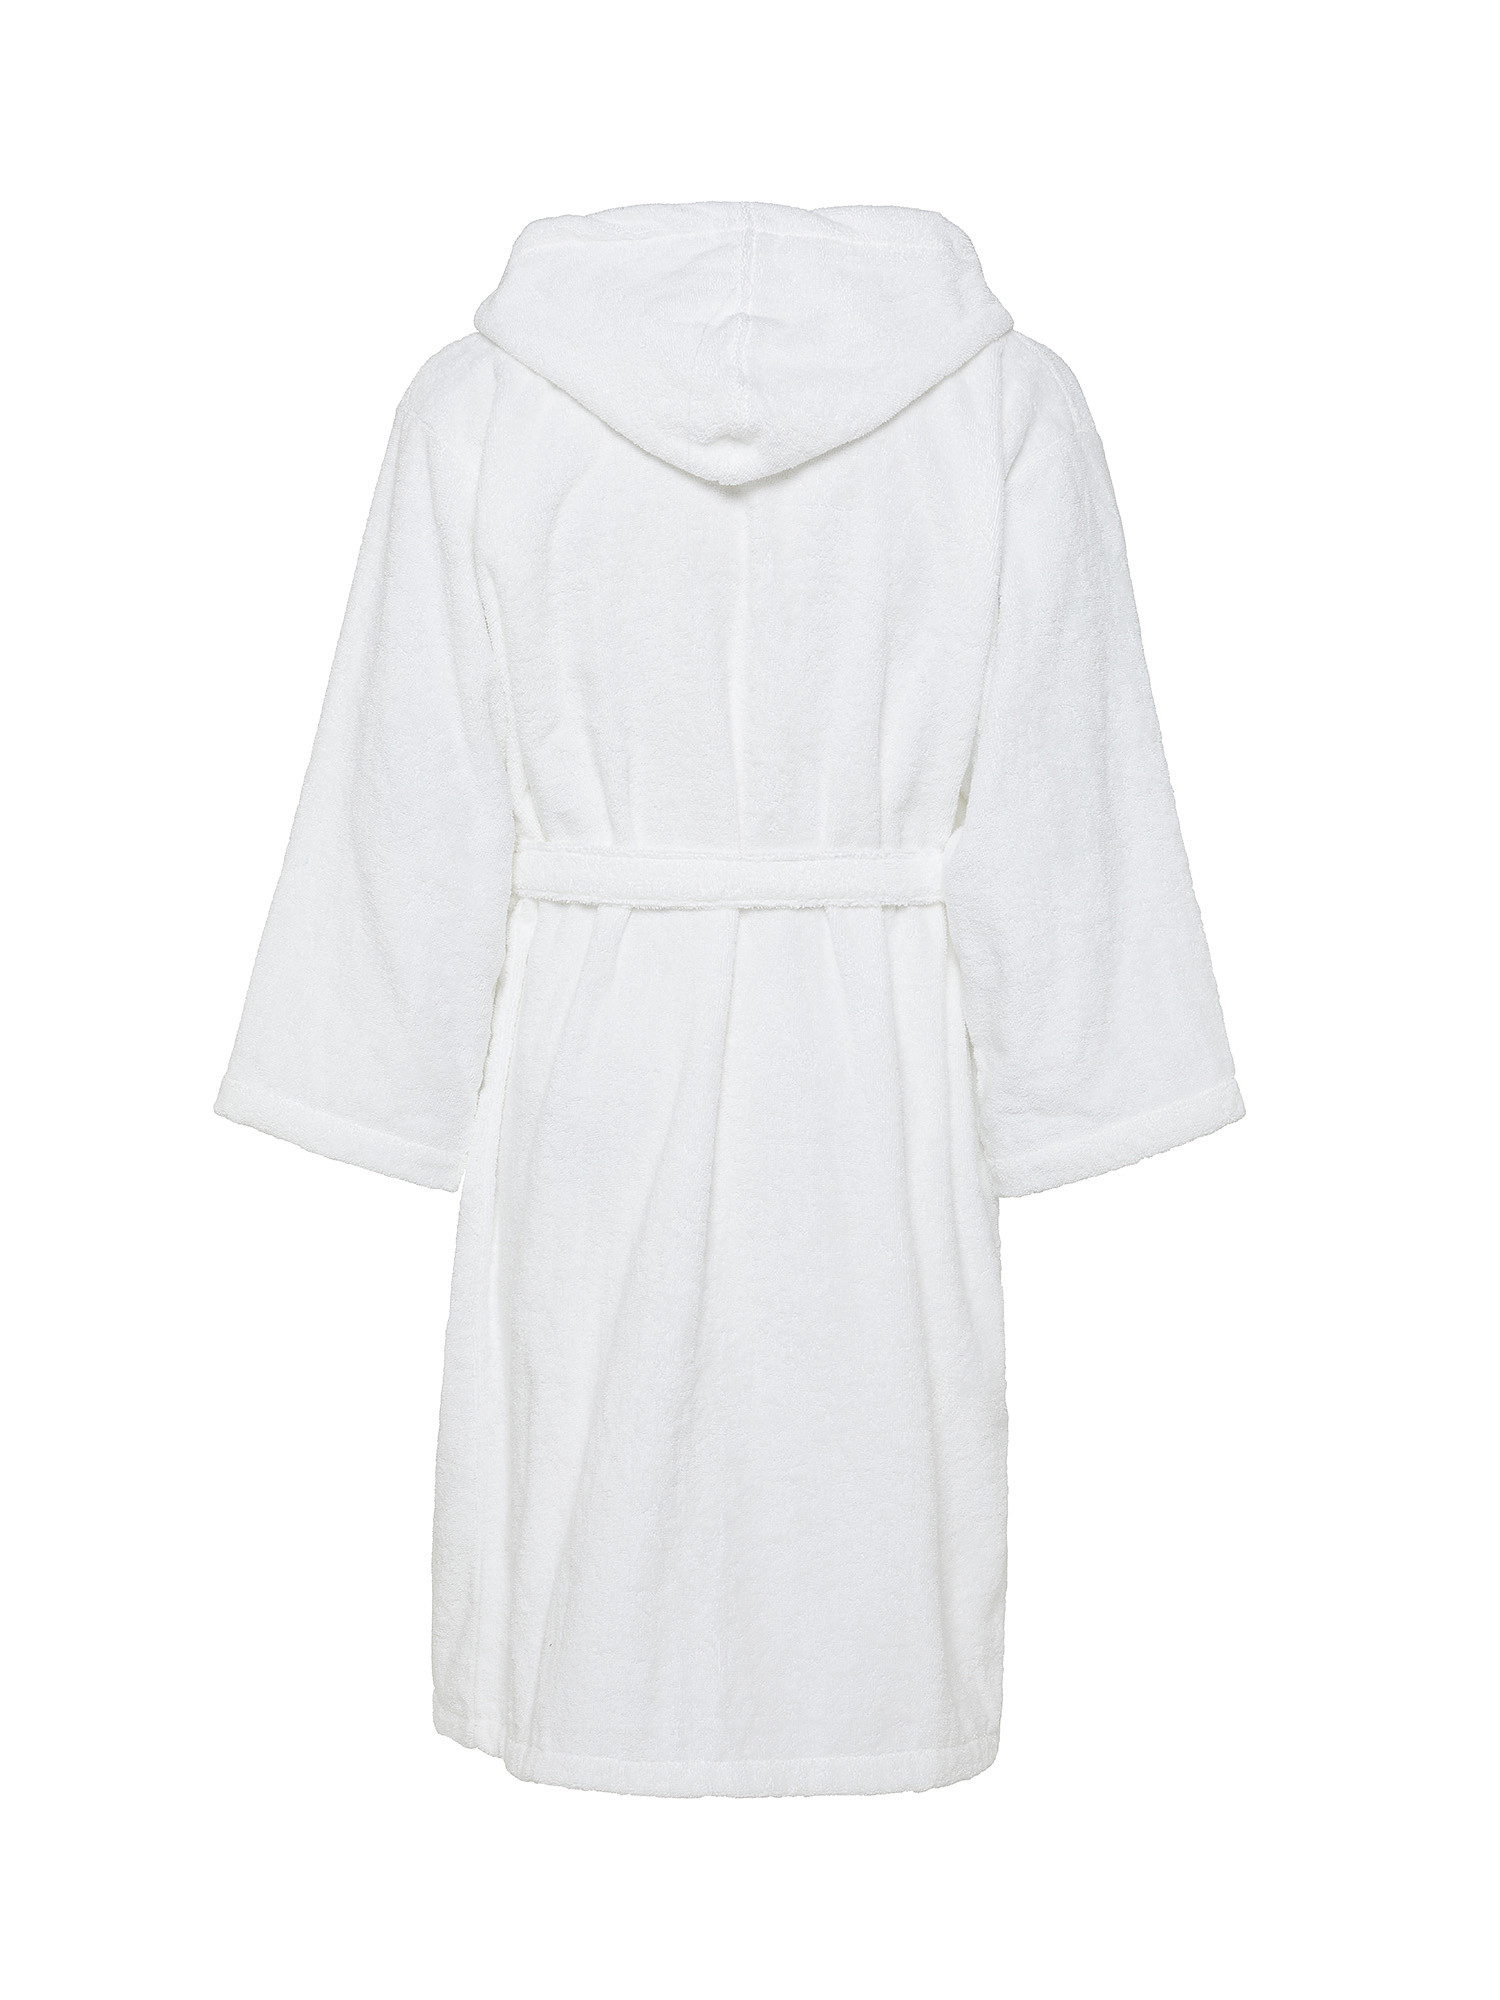 Zefiro solid color 100% cotton bathrobe, White, large image number 1